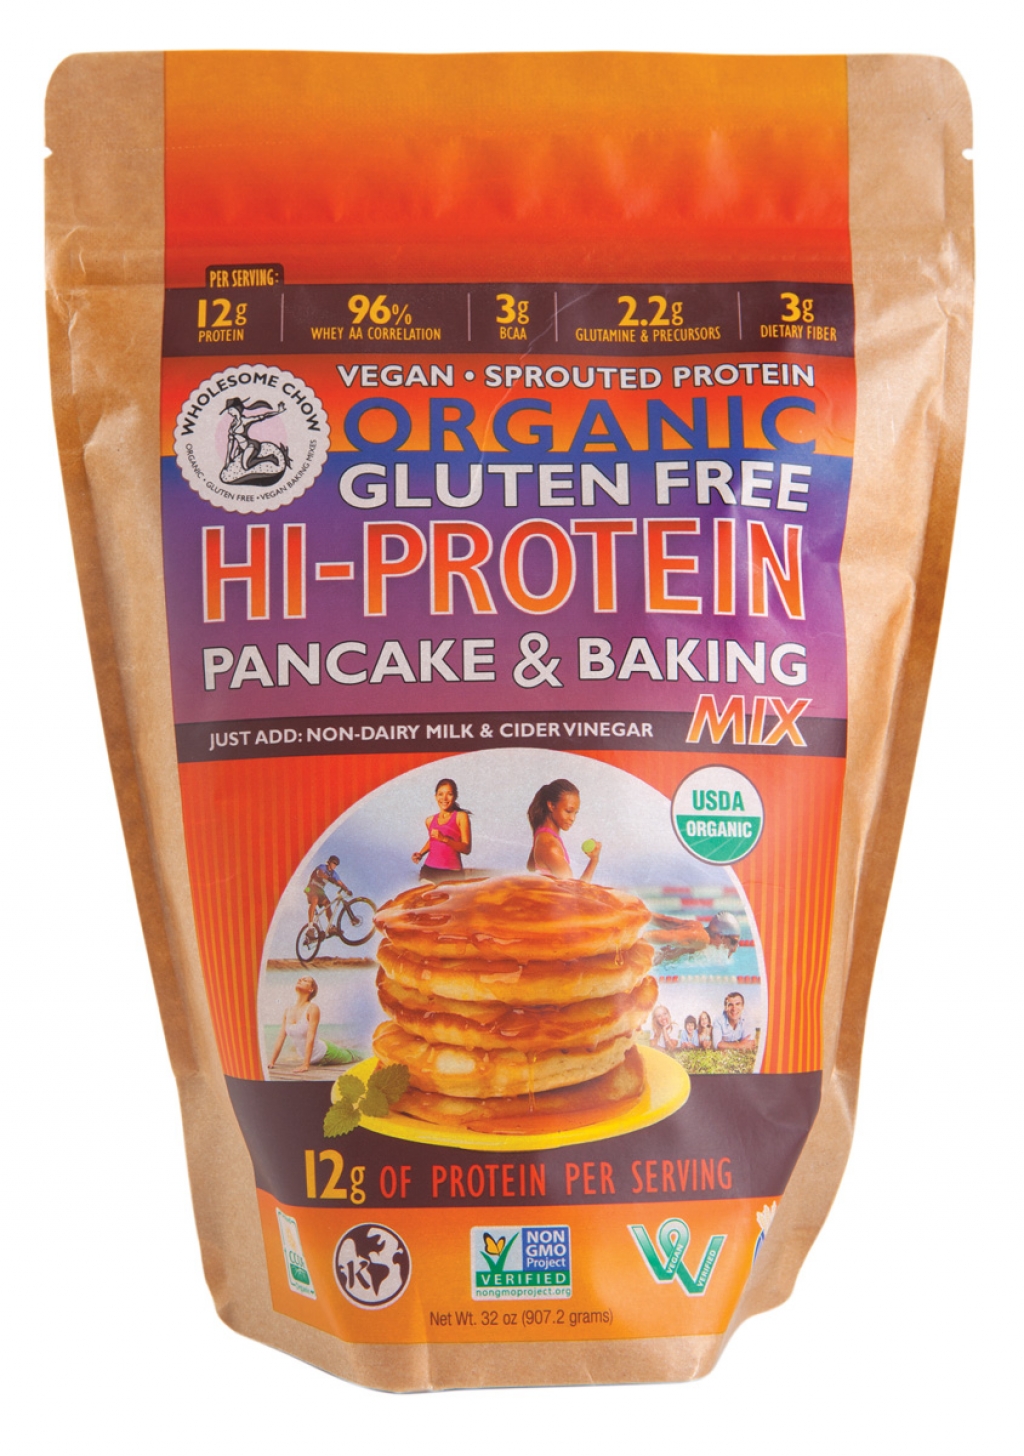 Wholesome Chow’s Organic Hi-Protein pancake and baking mix